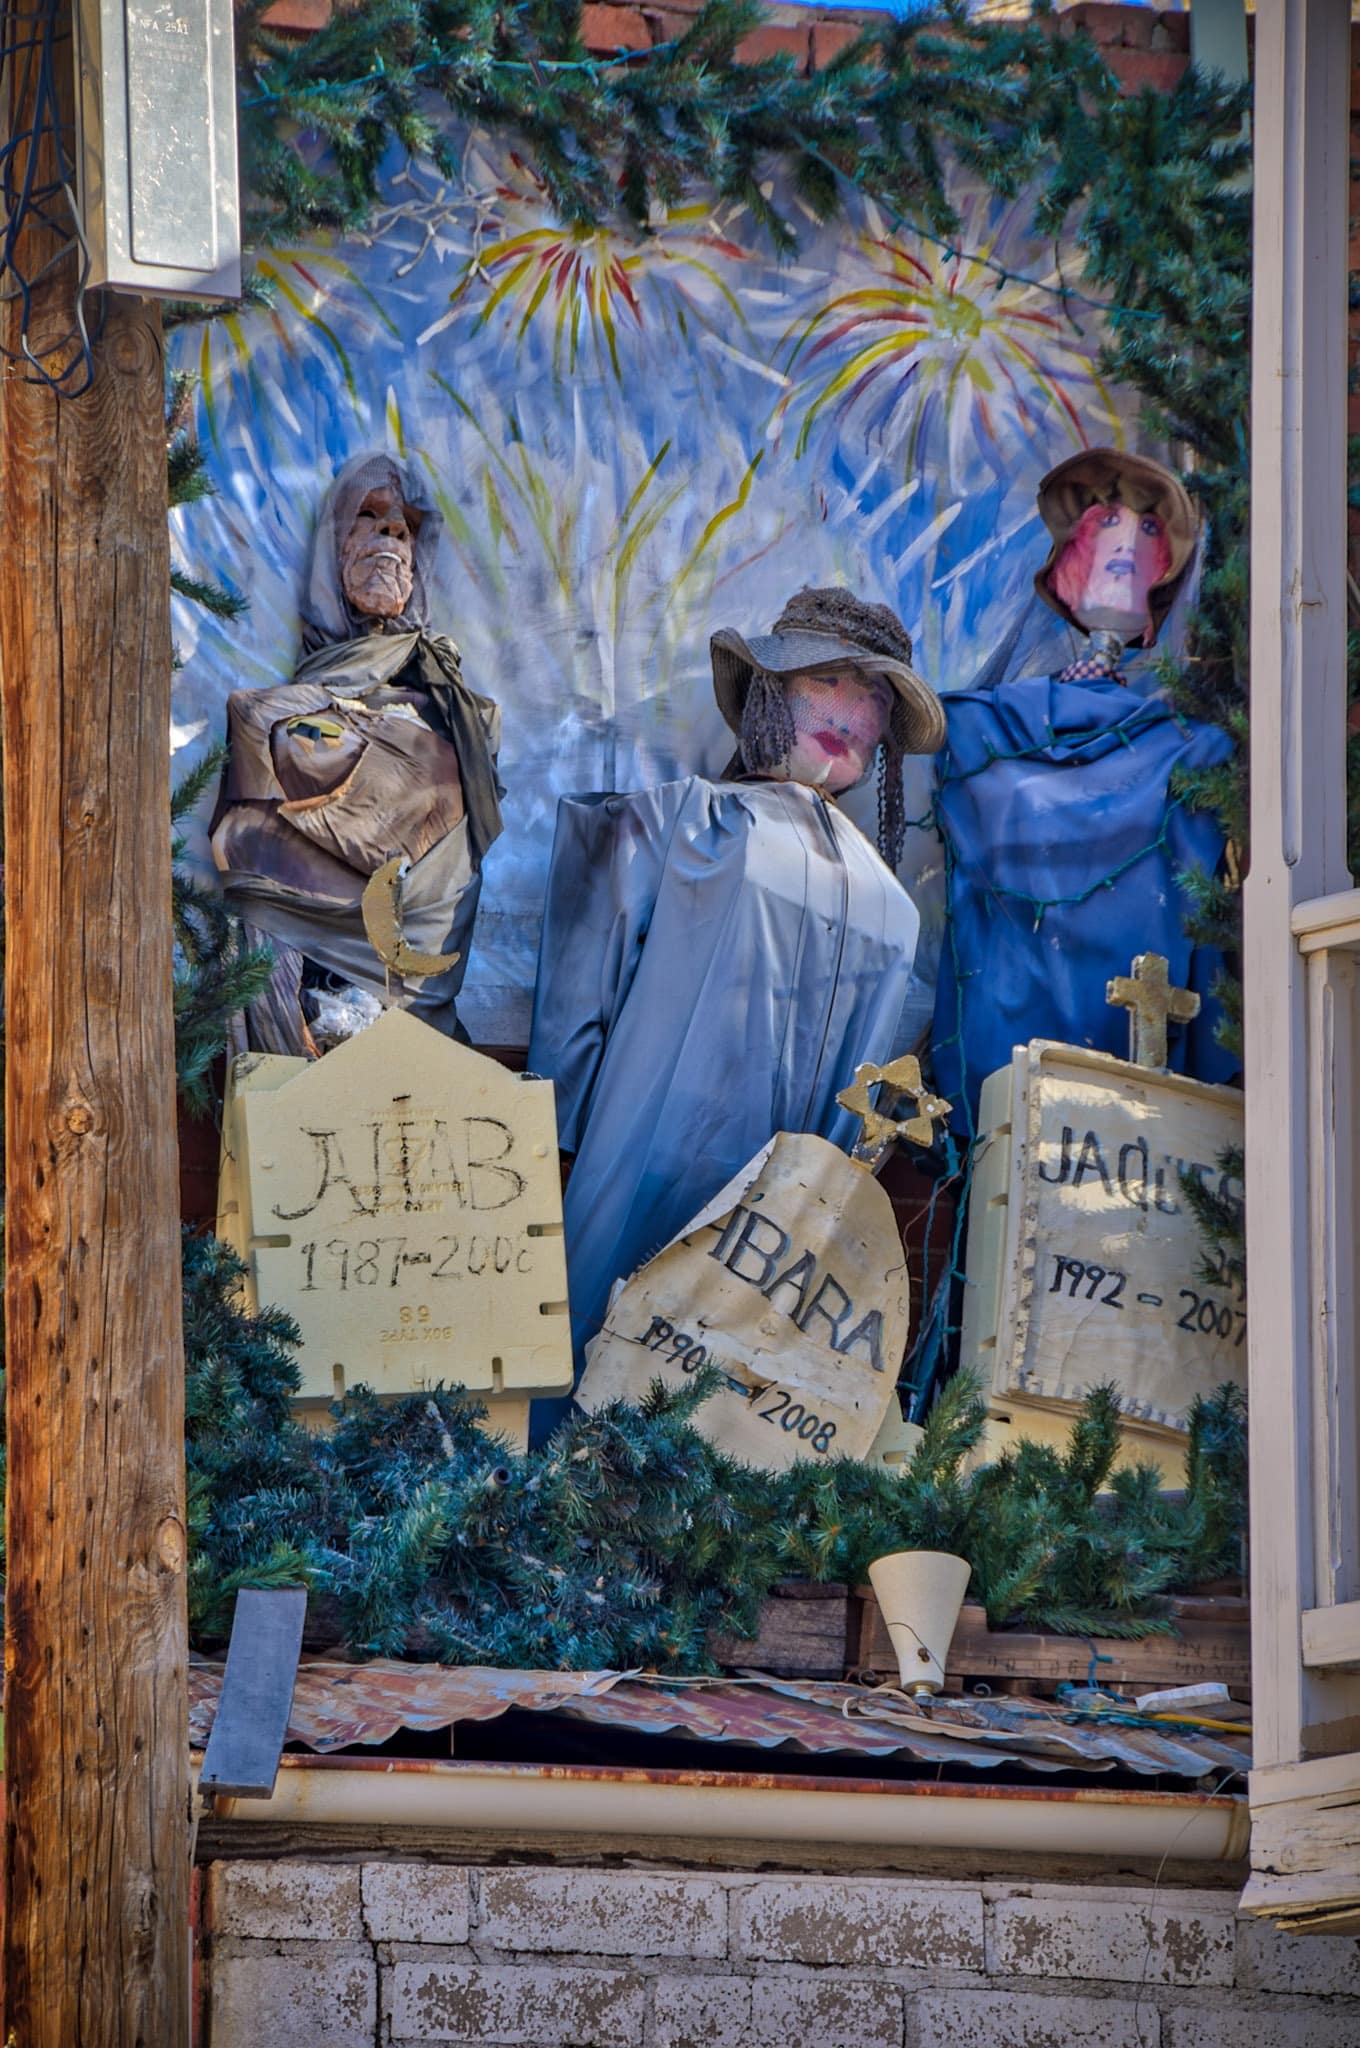 This rather odd window display could be interpreted as an homage to the many cultures that found their way to Bisbee during its boom times. Who knows?